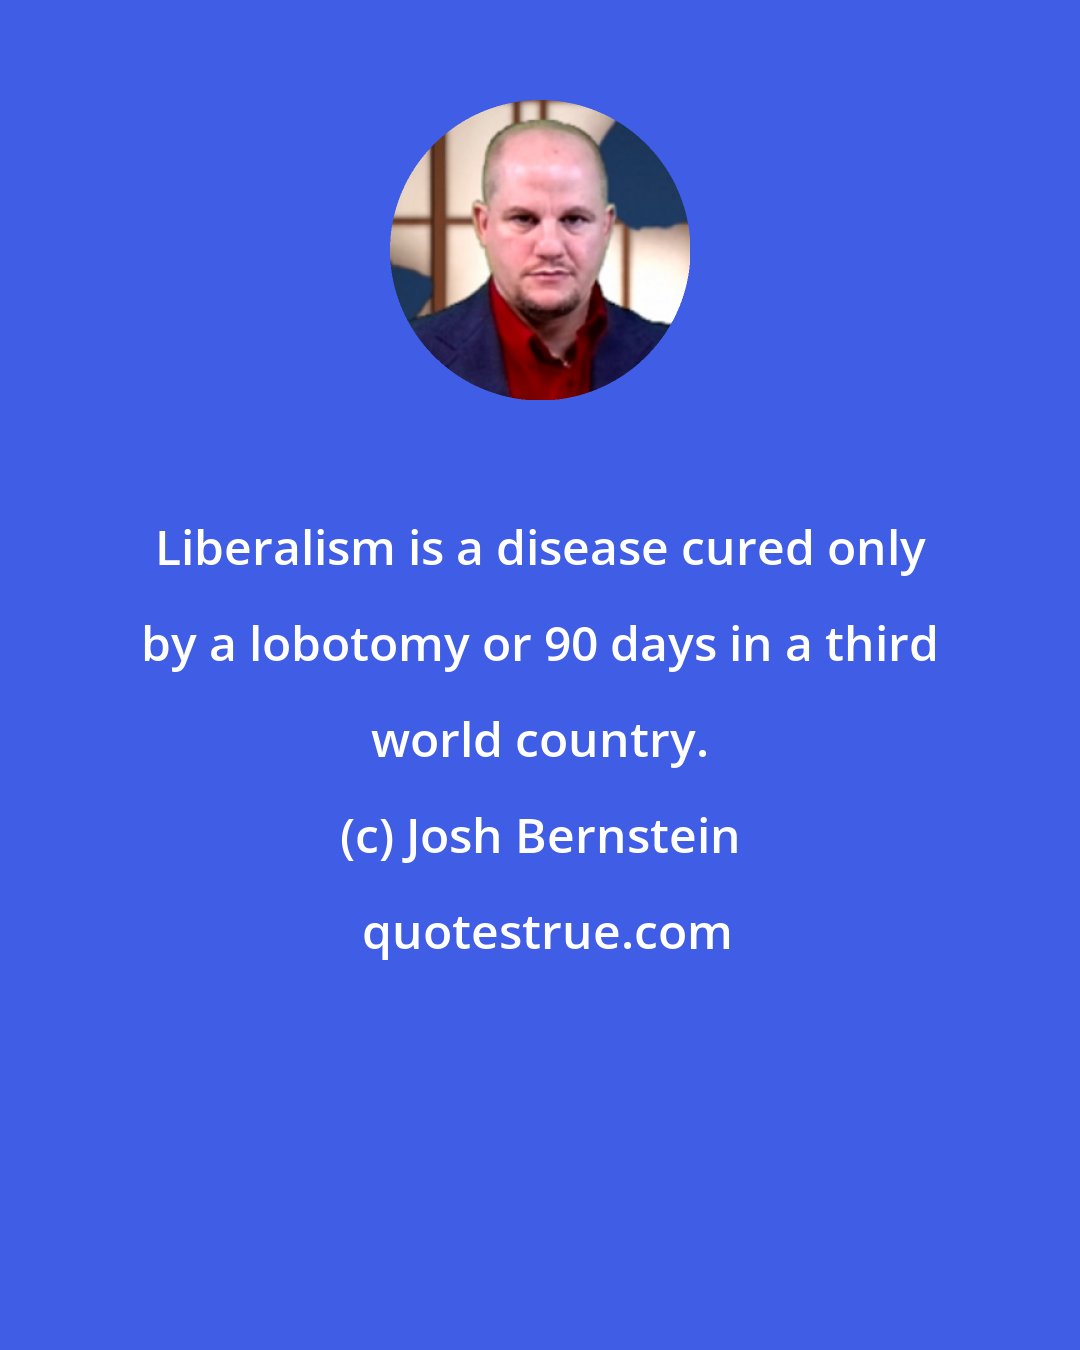 Josh Bernstein: Liberalism is a disease cured only by a lobotomy or 90 days in a third world country.